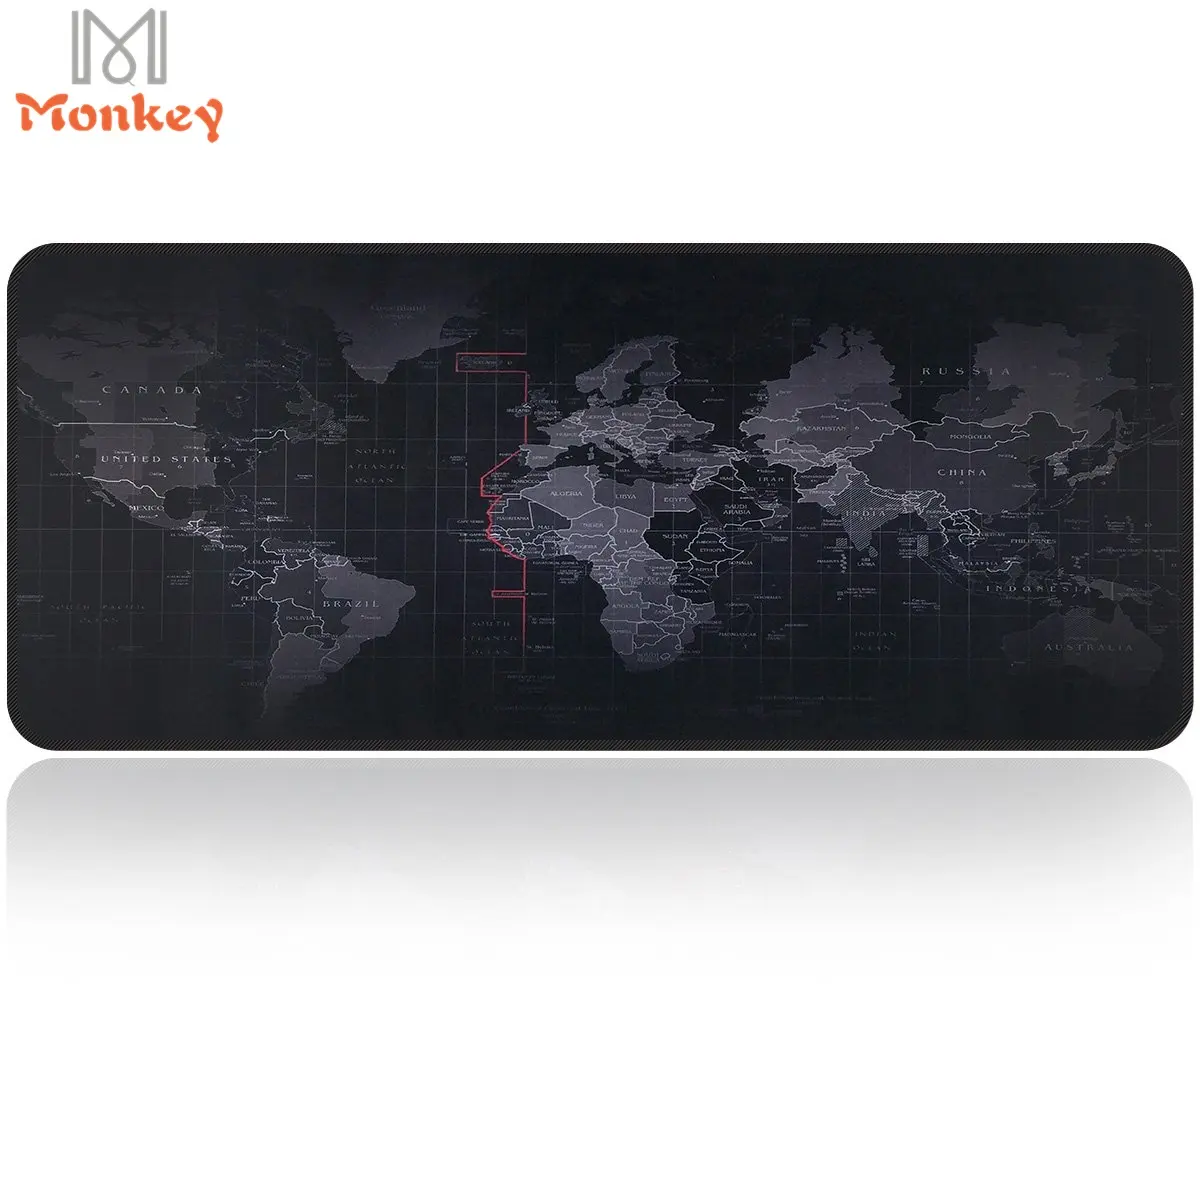 Extra size gaming playmat rubber table mat oversize rubber gaming mouse pad